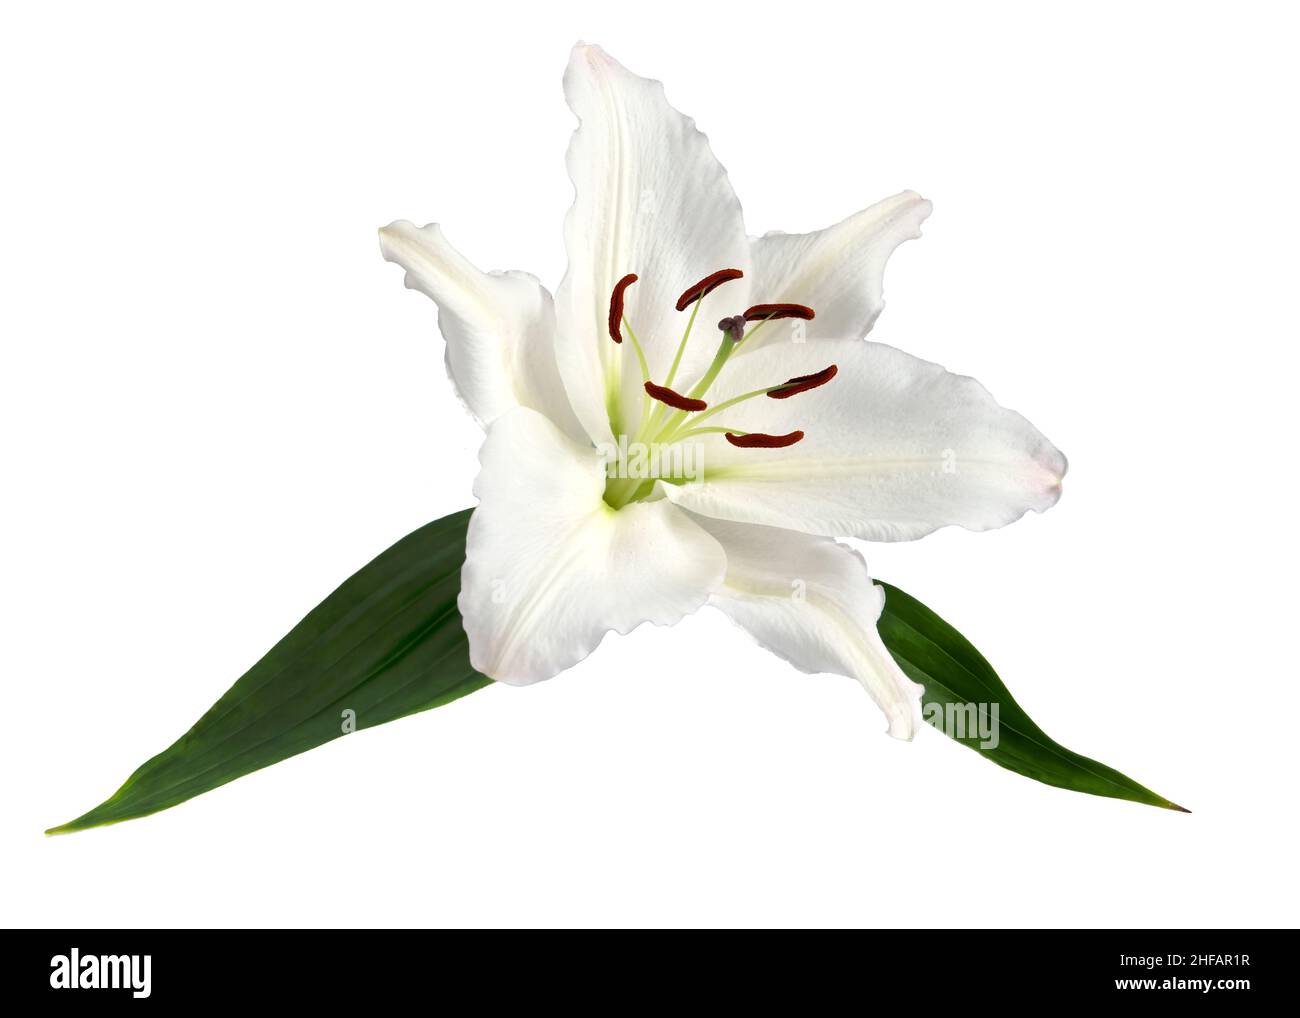 close up of a beautiful elegant lily  Lilium candidum with greenery isolated on a white  background  , ideal for graphic resources or cards Stock Photo